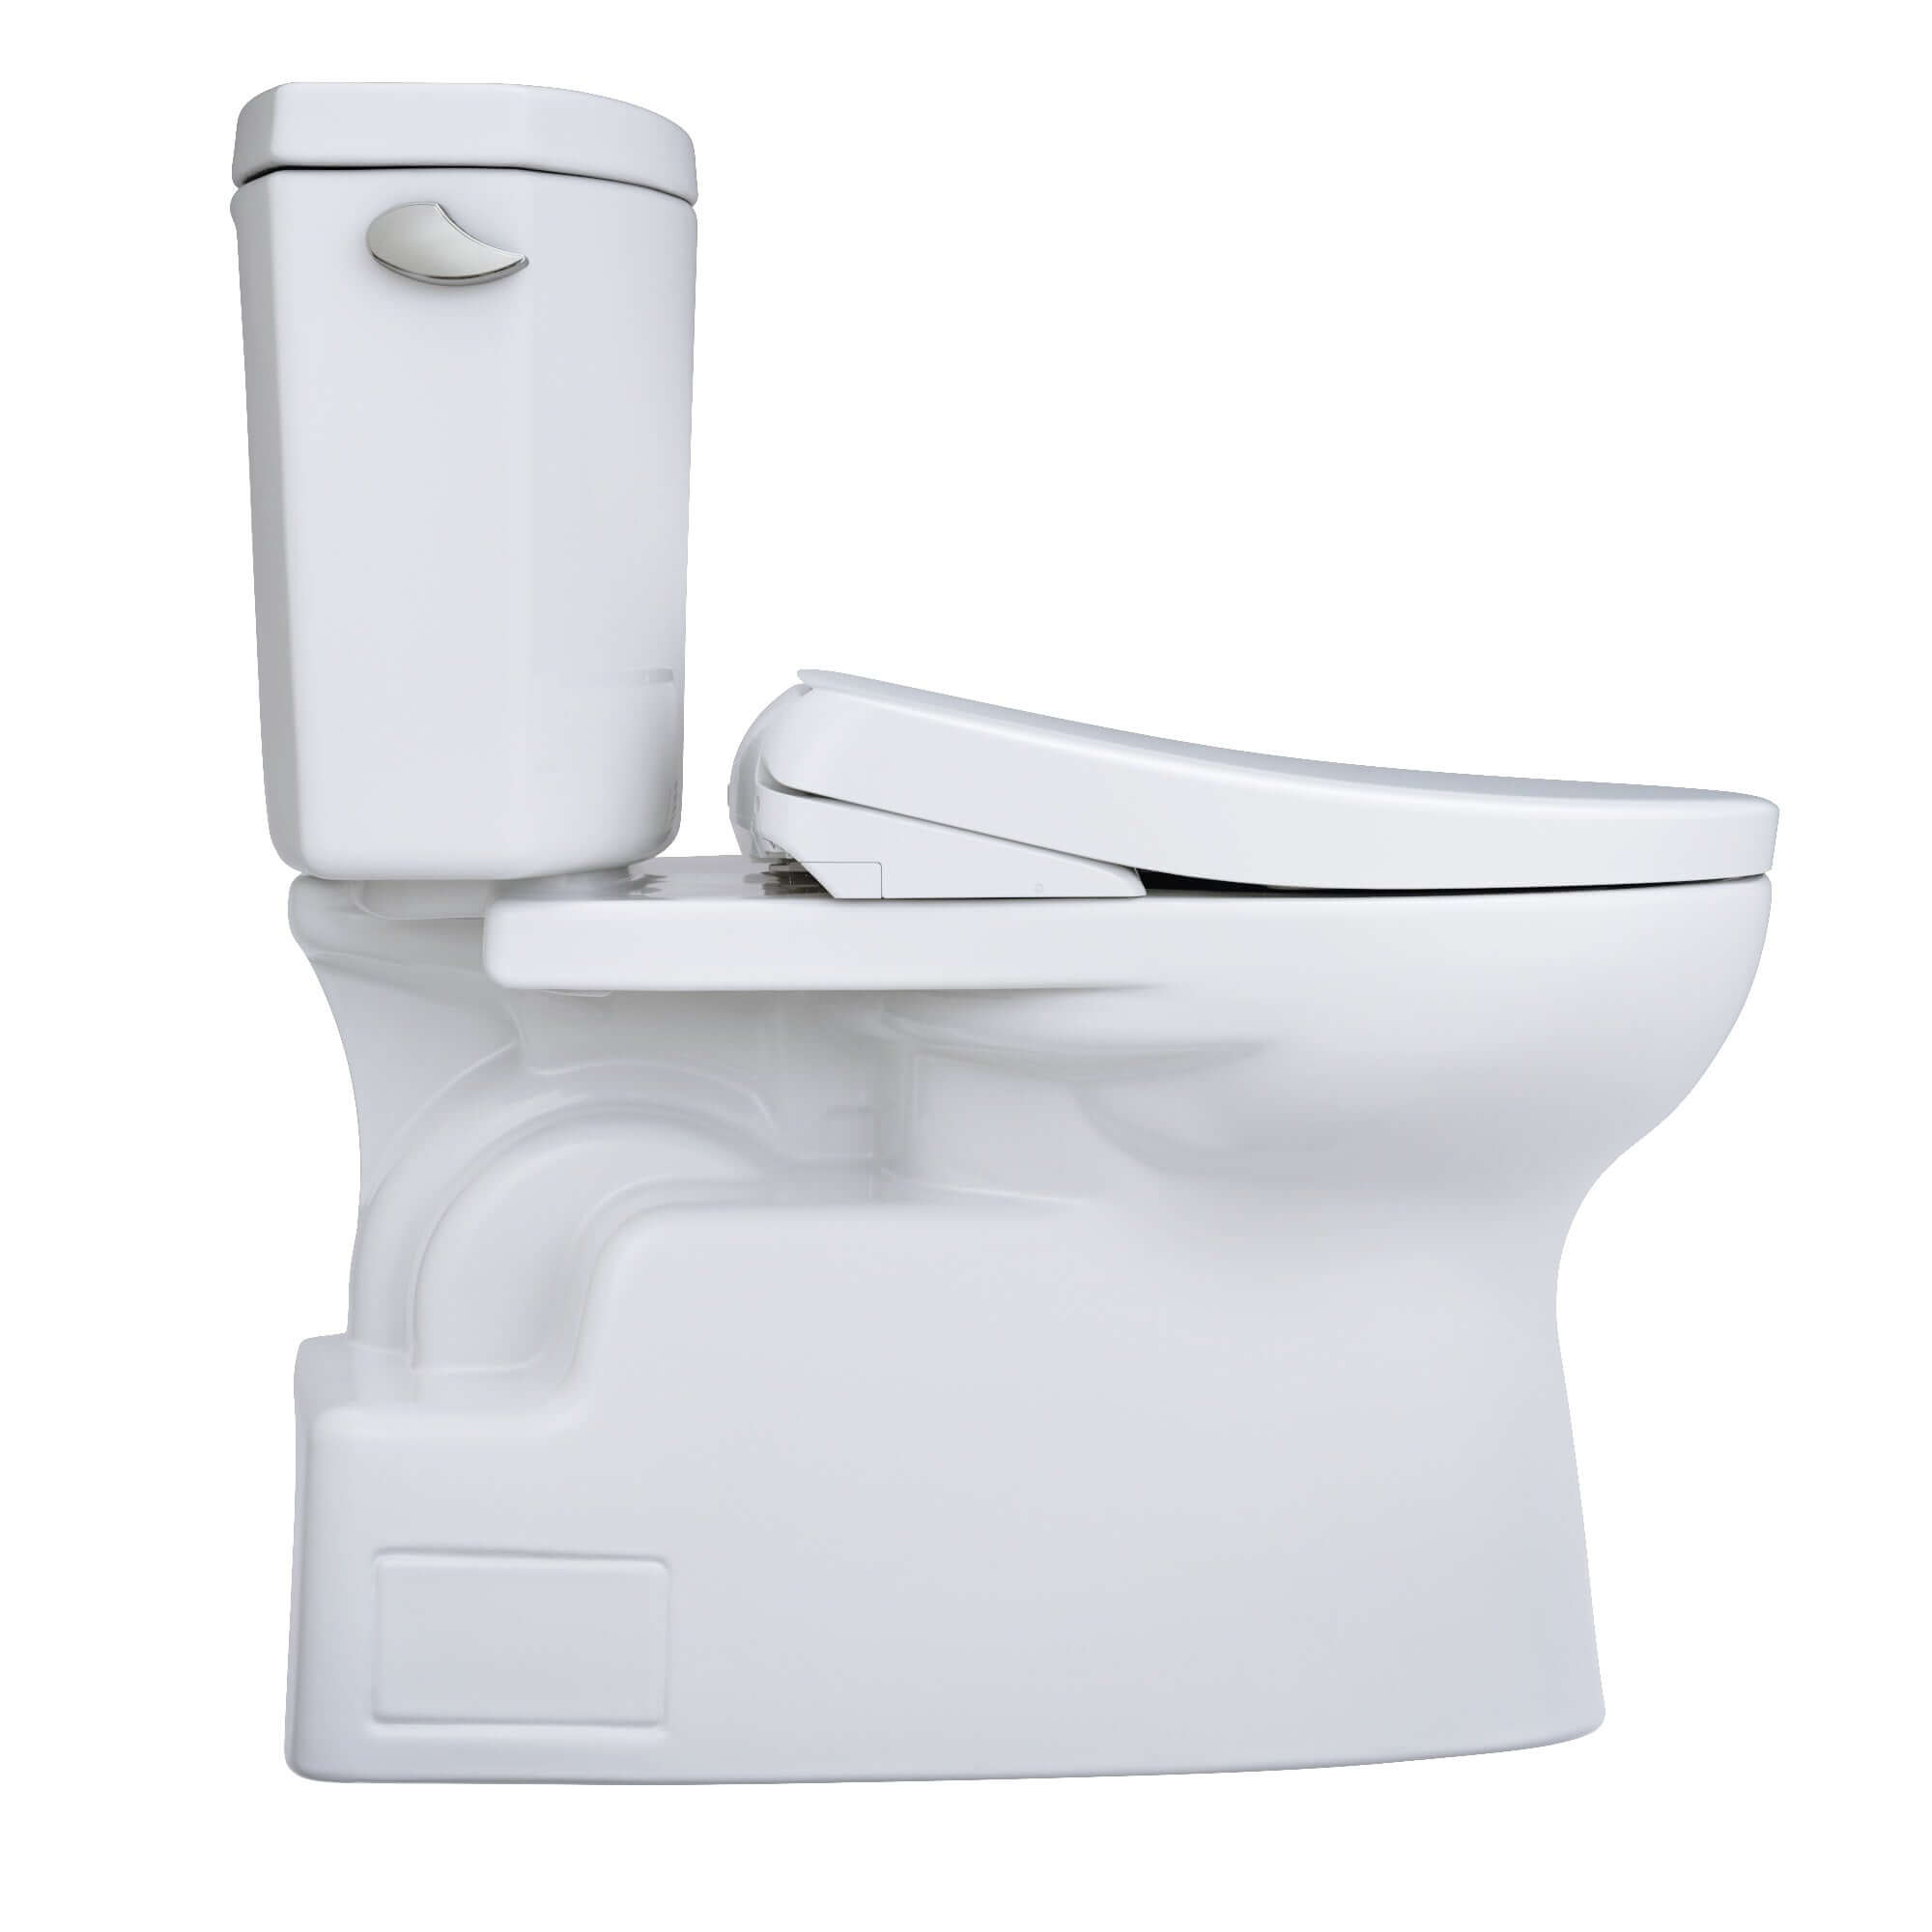 TOTO WASHLET+ Vespin II Two-Piece Elongated 1.28 GPF Toilet and WASHLET+ S7 Contemporary Bidet Seat, Cotton White - MW4744726CEFG#01